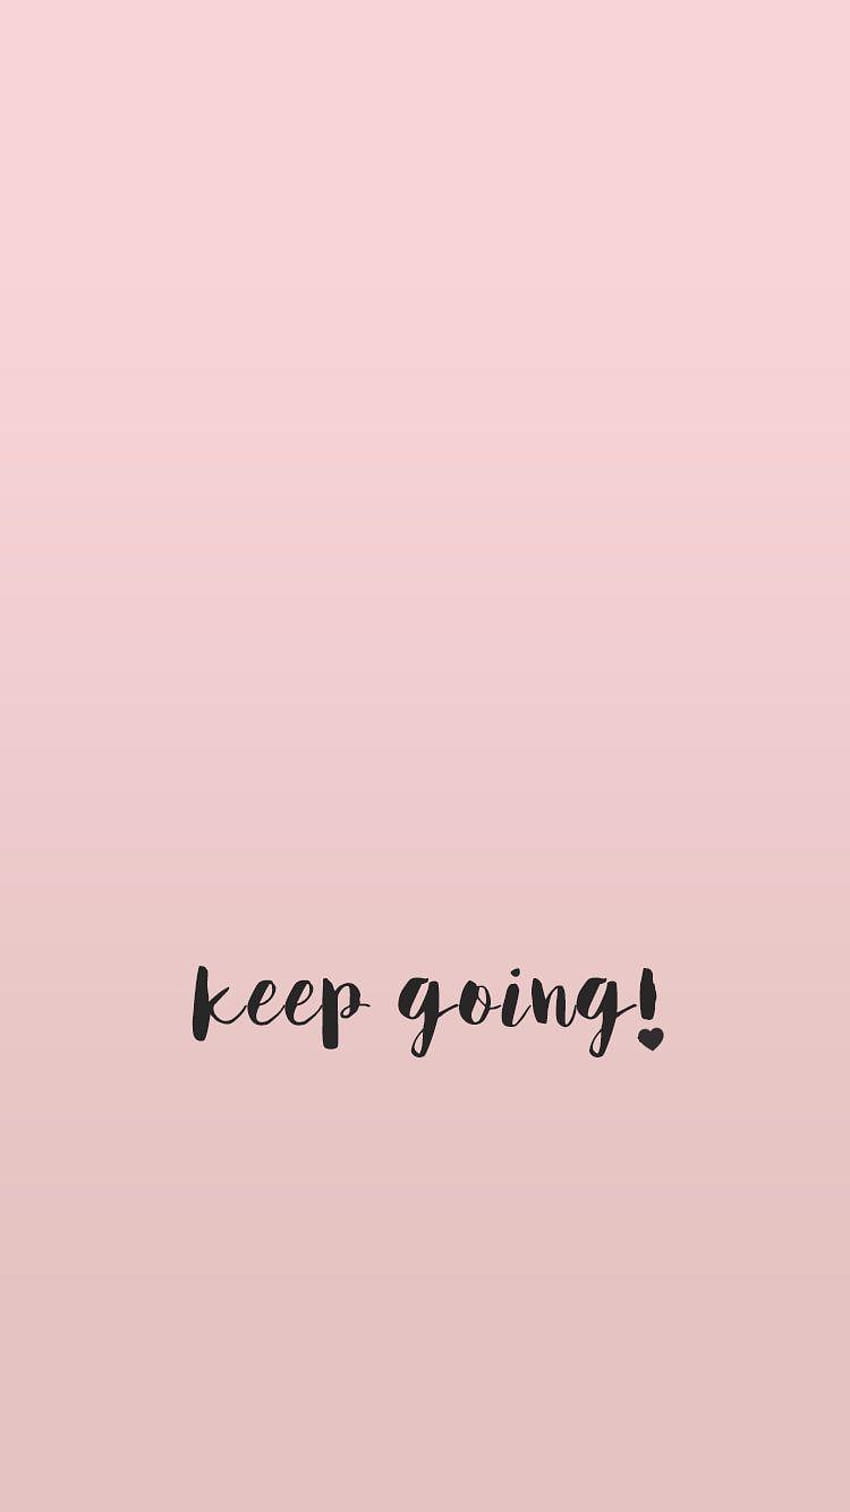 Minimal, quote, quotes, inspirational, pink, girly, background pics with  inspiration qoutes HD phone wallpaper | Pxfuel